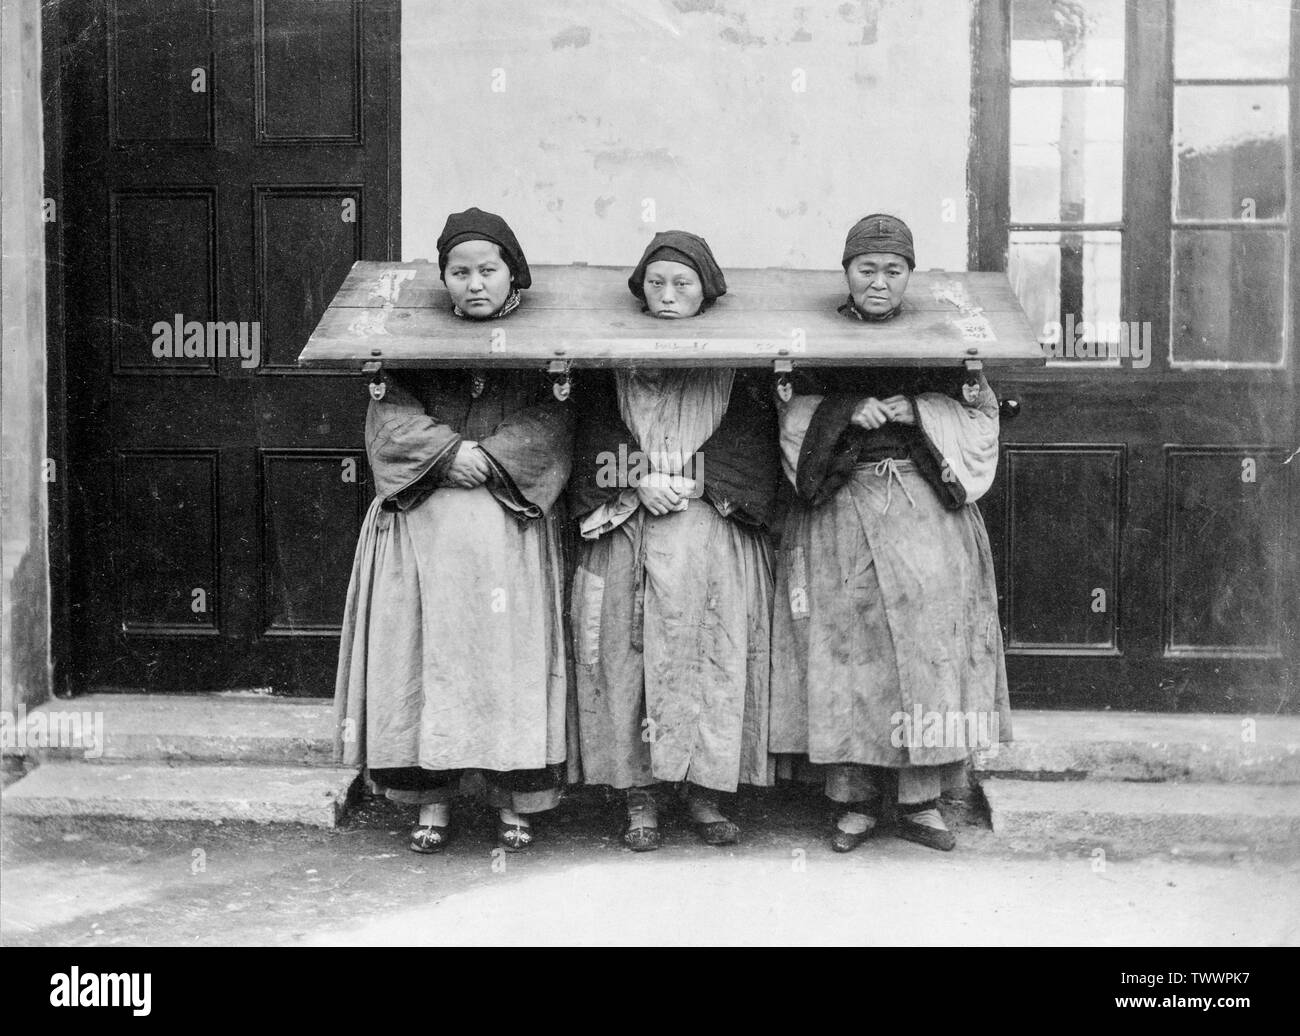 A late 19th century, or early 20th century vintage black and white photograph showing three Chinese women locked in a Cangue, a device used for public humiliation or sometimes torture in may parts of Eastern Asia. Stock Photo